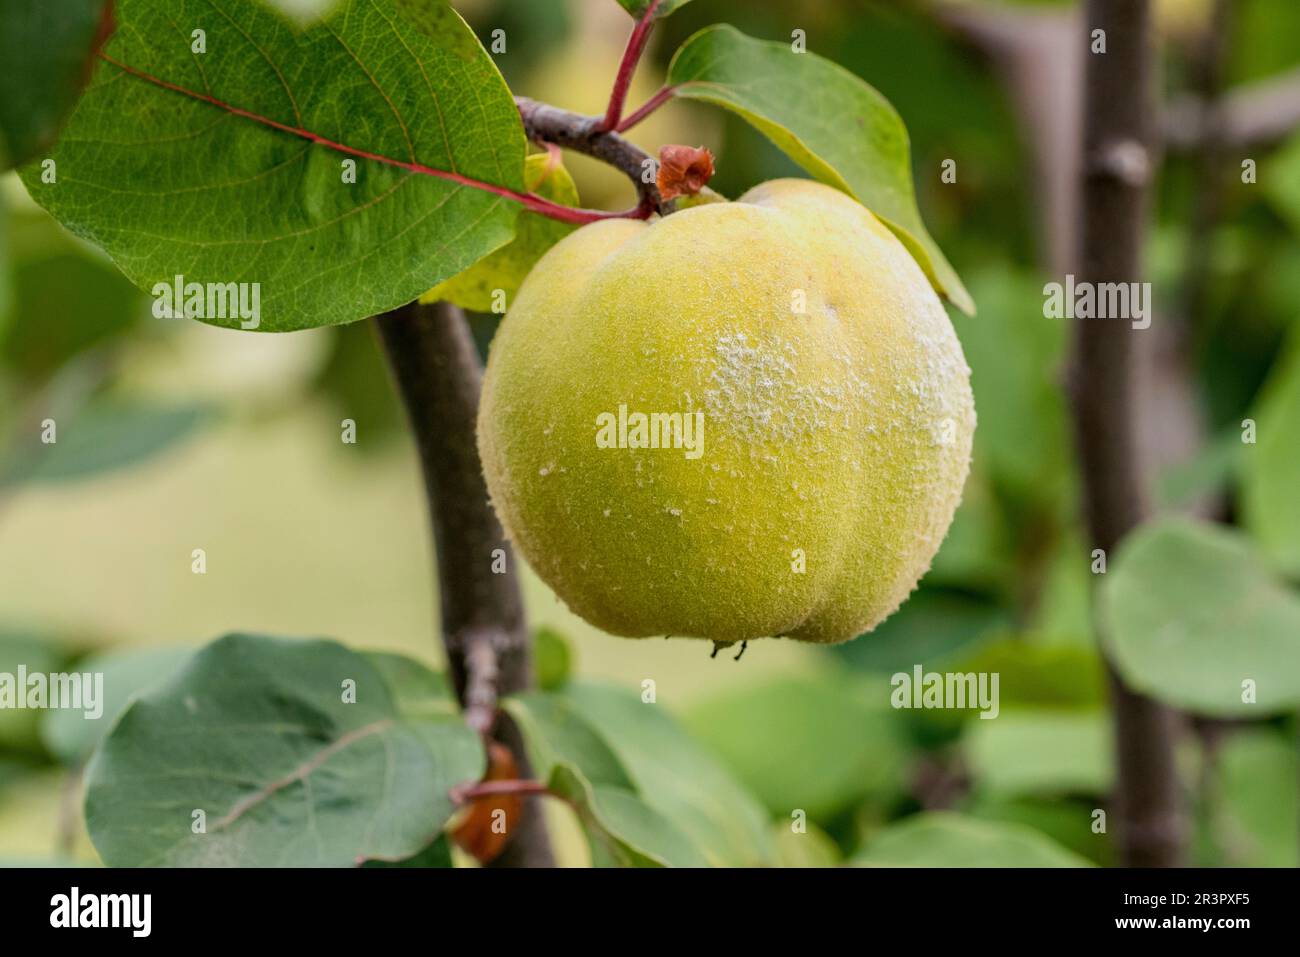 Common quince (Cydonia oblonga Champion), quince of cultivar Champion on a tree Stock Photo